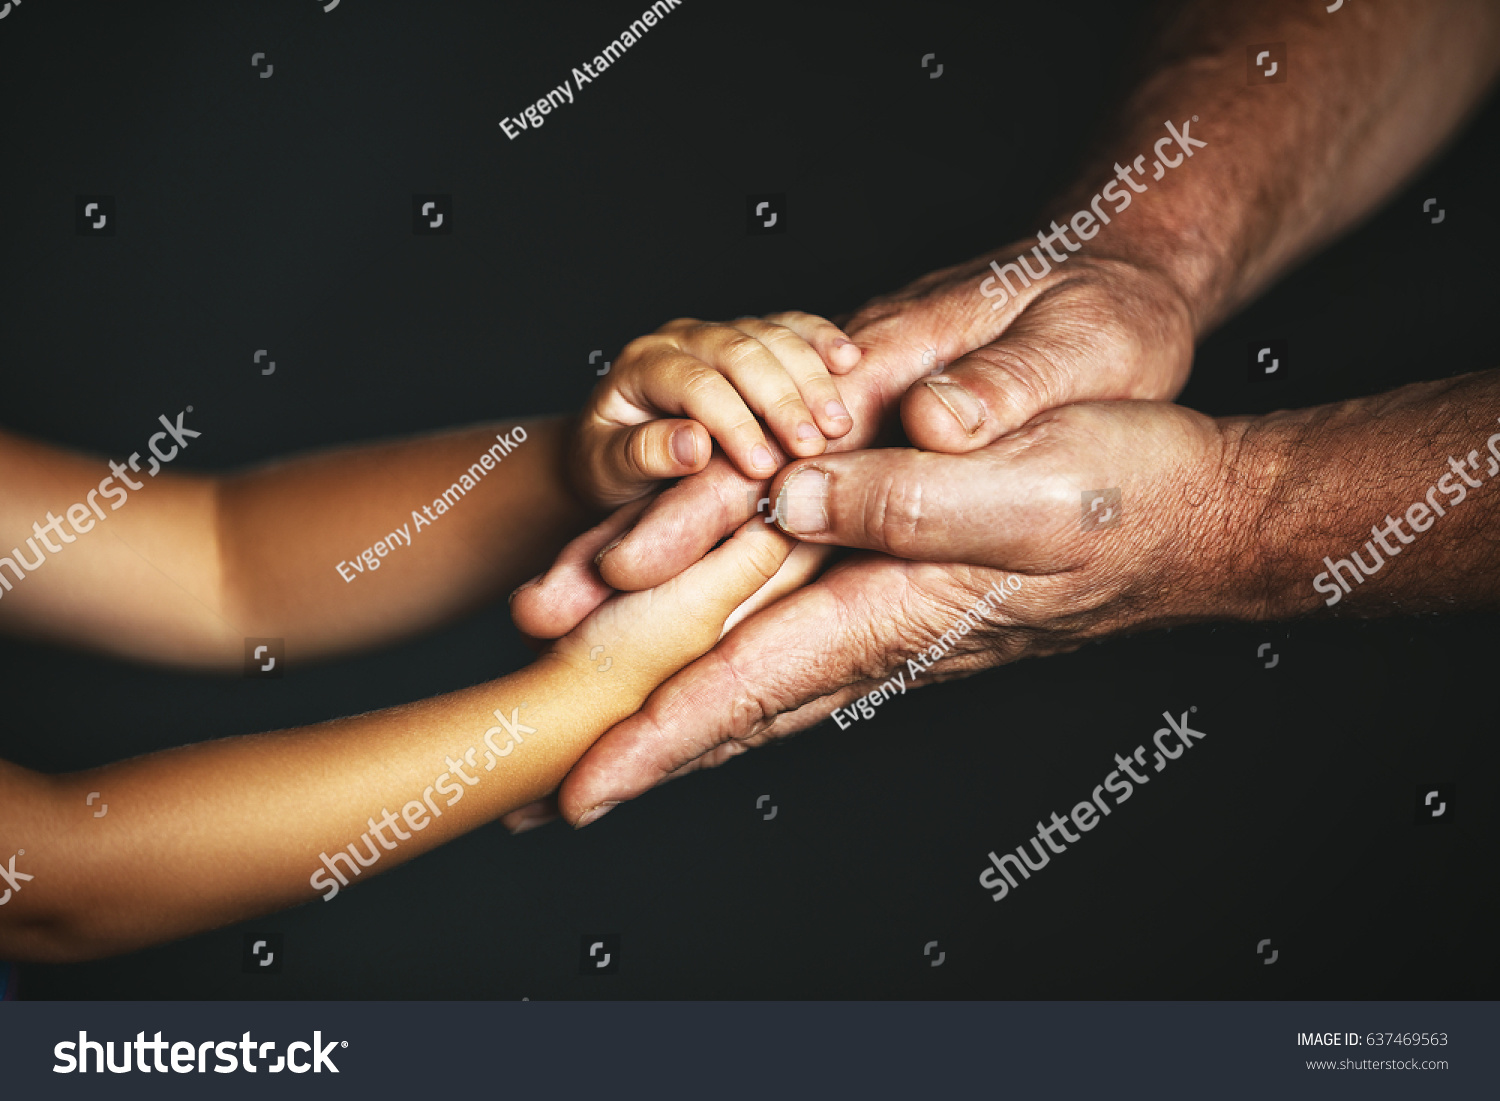 The concept of generations. Hand of a child and an elderly person #637469563